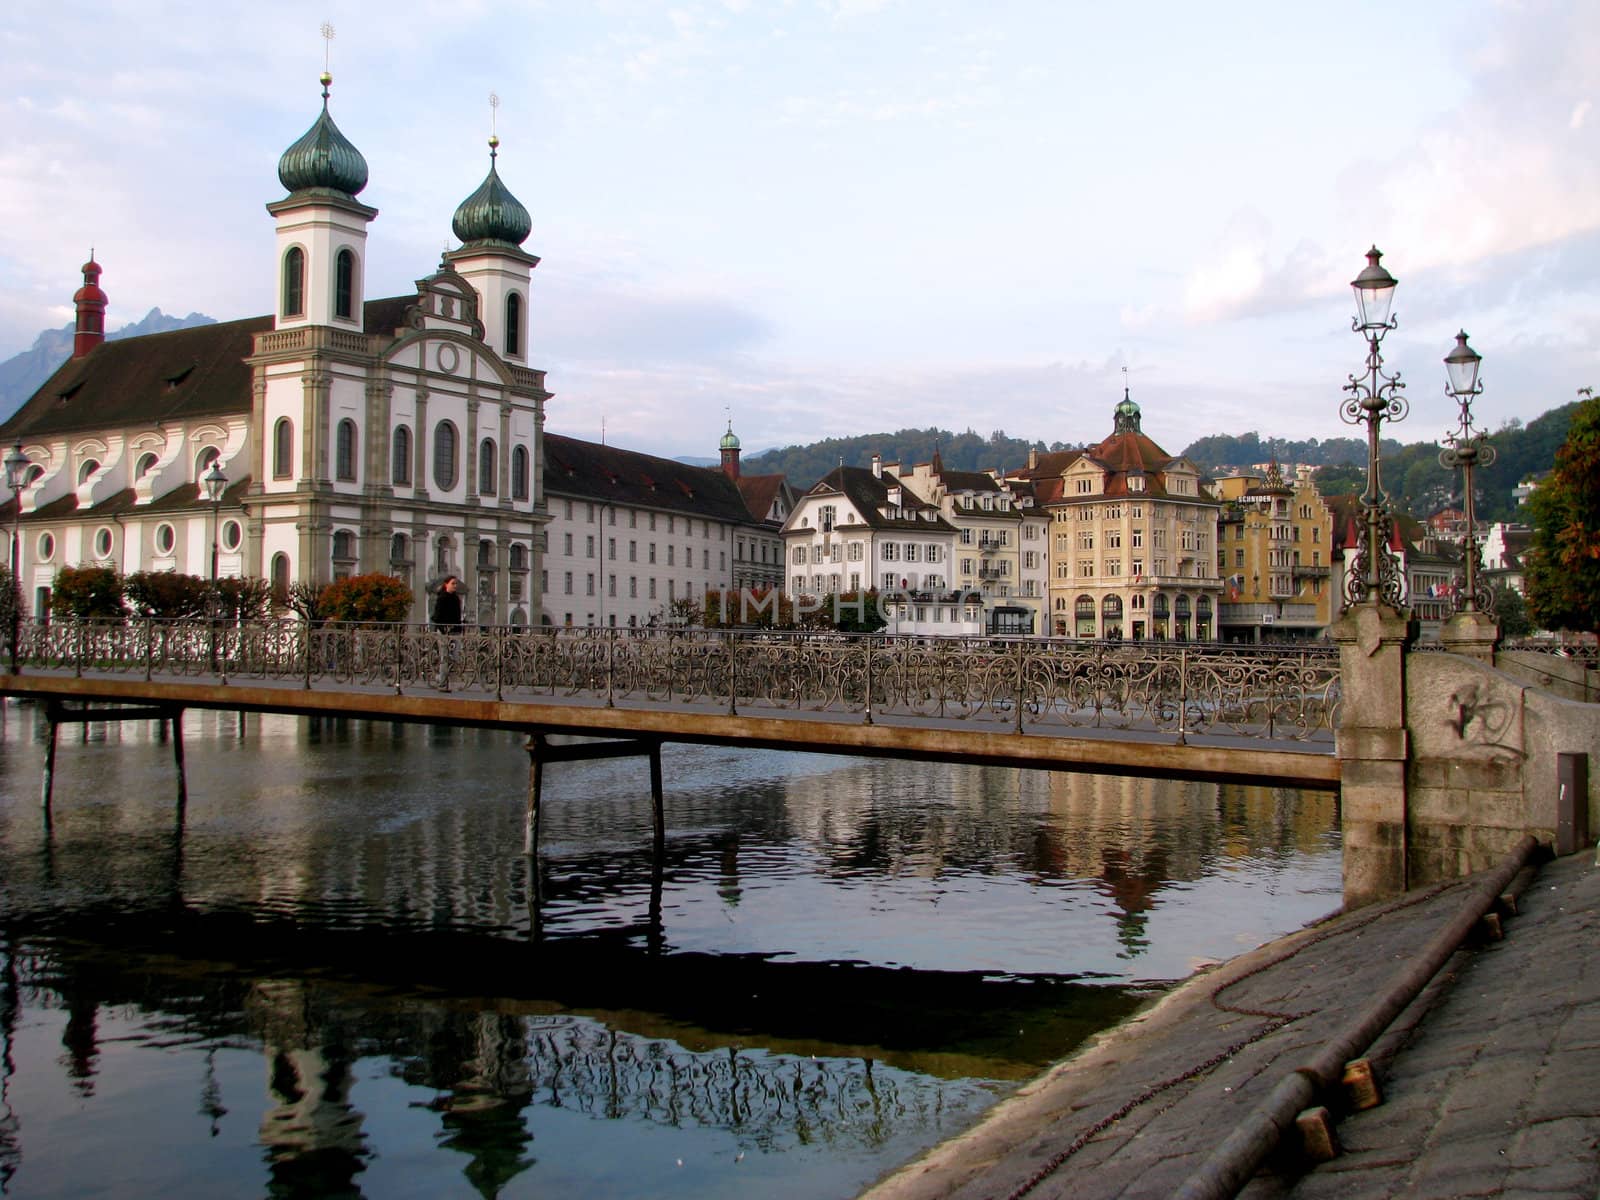 The cathedral of Lucerne in Lucerne, Switzerland